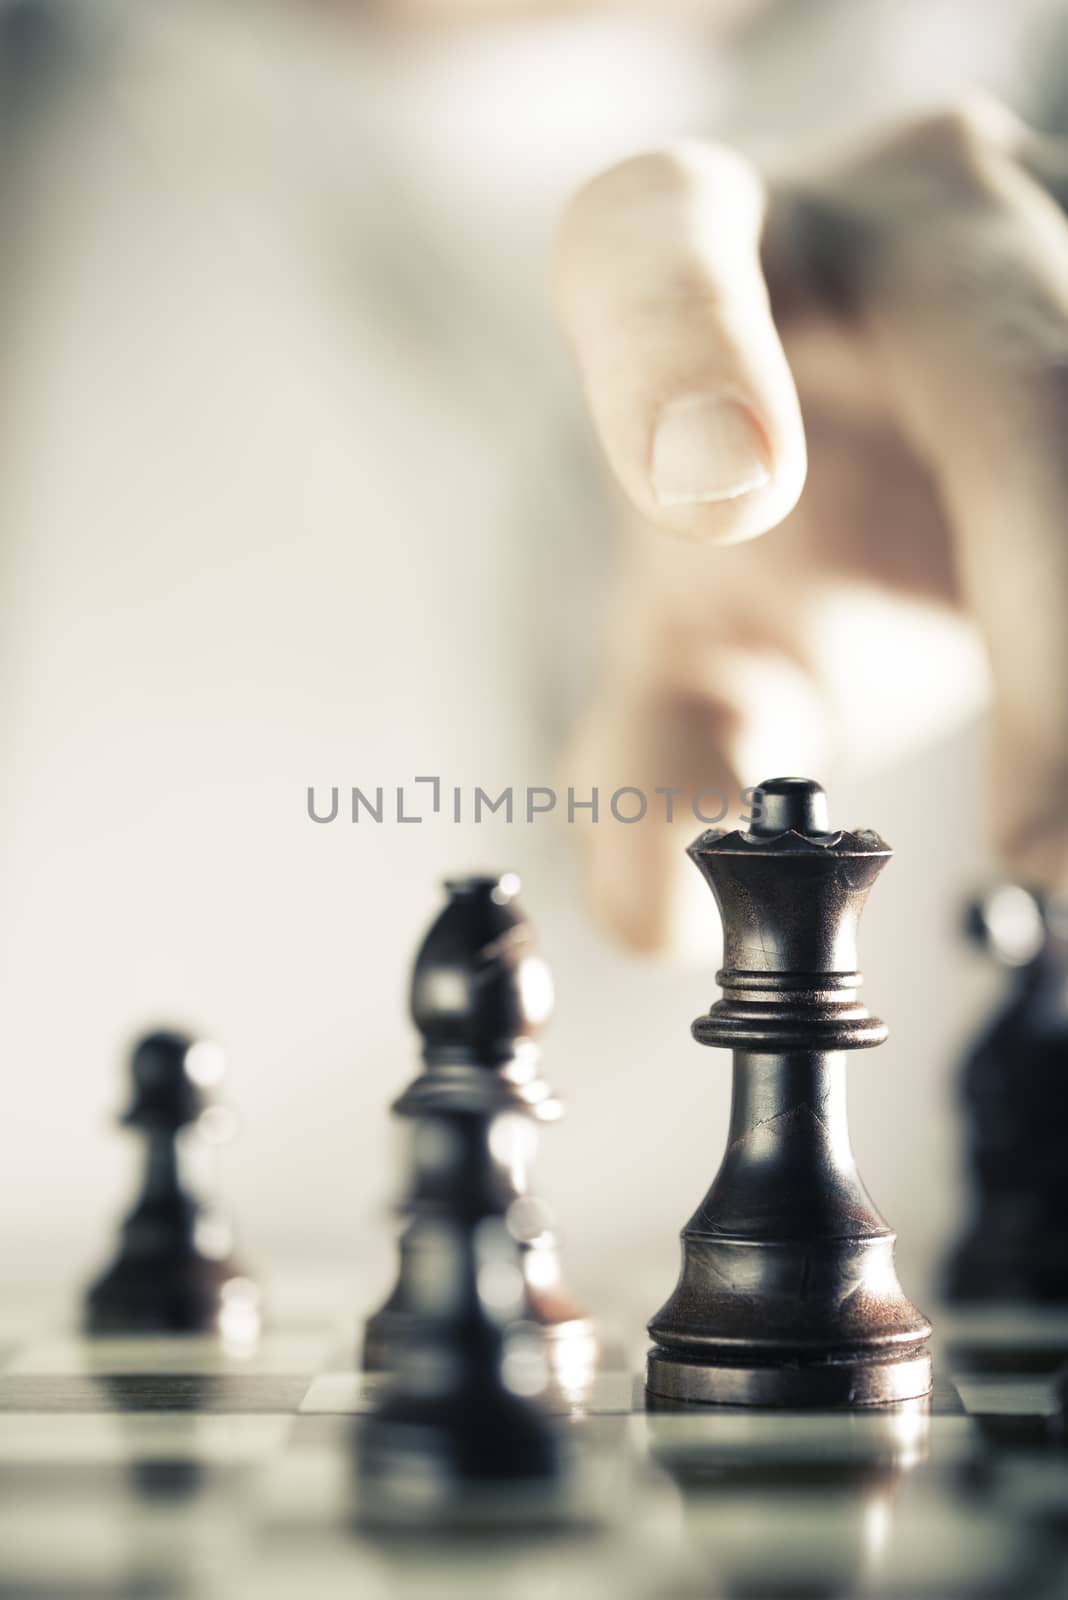 Vertical Image of a chess game with focus on the queen and a blurry hand at the background, Copy space on the left side. Concept of strategic business or risk management.